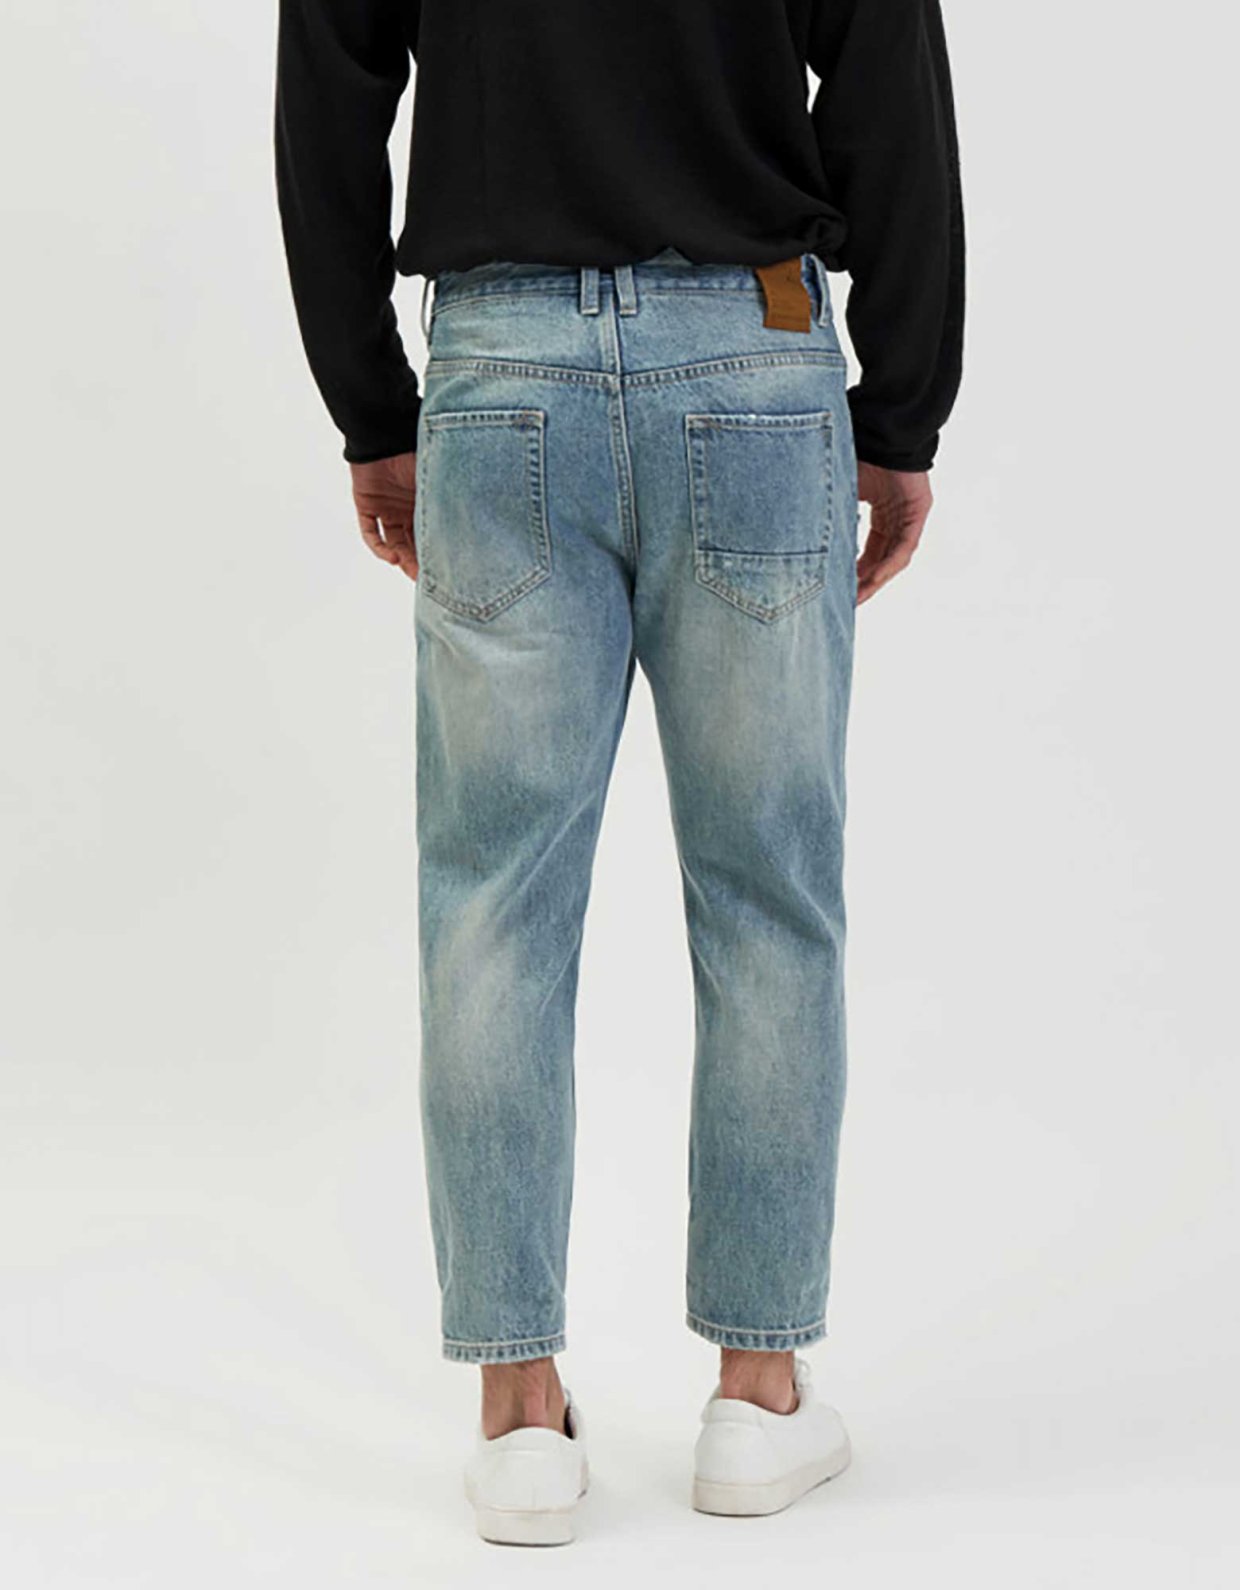 Gianni Lupo Mike 95 carrot fit jeans light blue